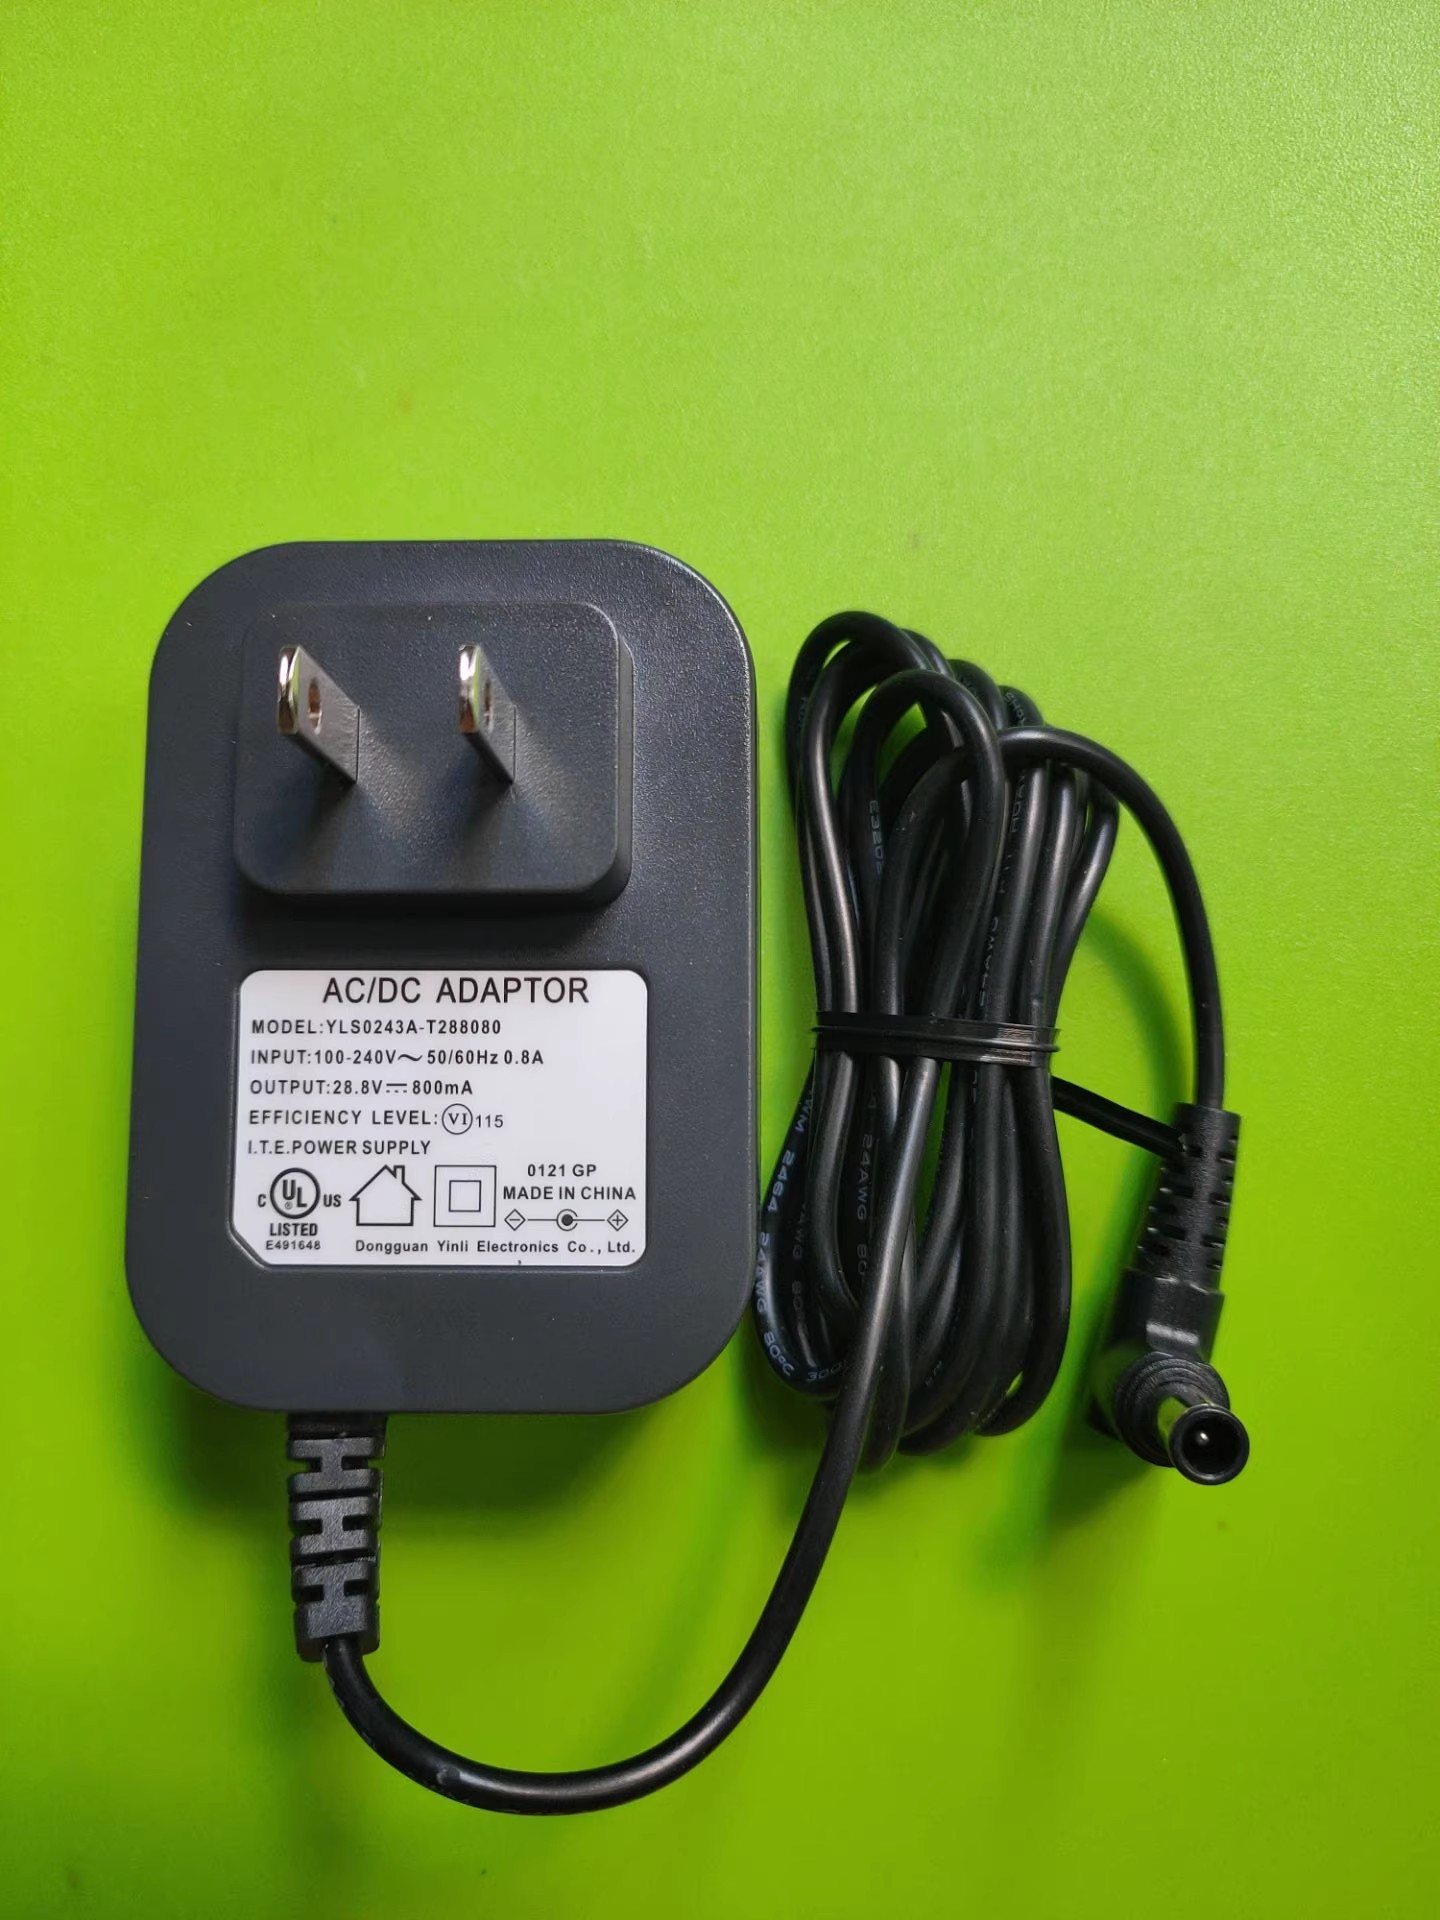 *Brand NEW* Shark 28.8V 800MA AC DC ADAPTHE YLS0243A-T288080 POWER Supply